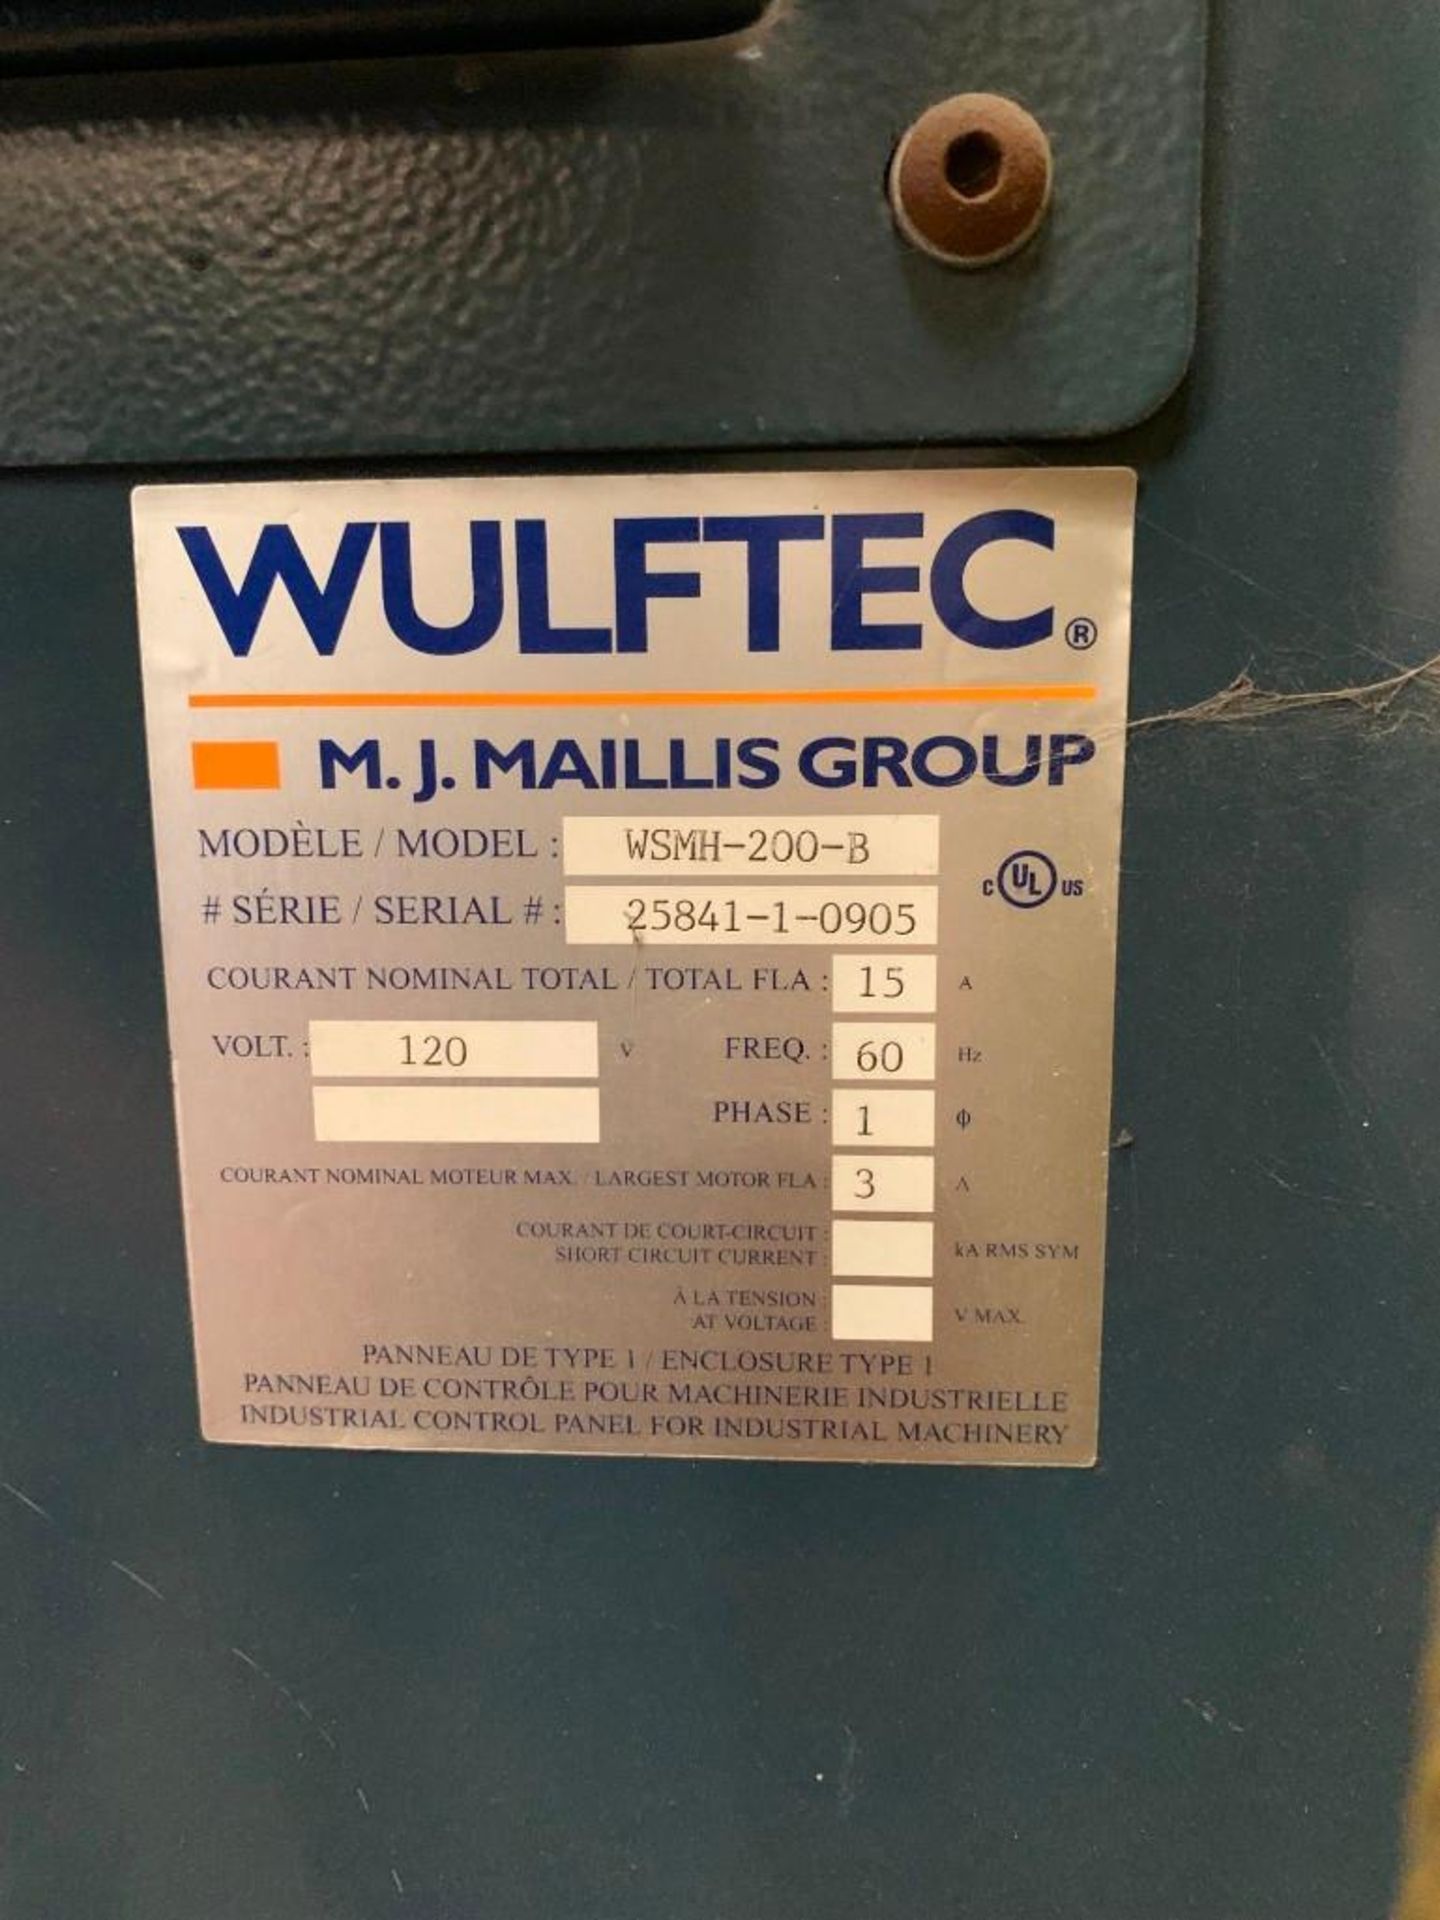 Wulftec Pallet Stretch Wrapper- Smart Series- Model - WSMH-200-B. Serial Number - 25841-1-0905- 120 - Image 5 of 5